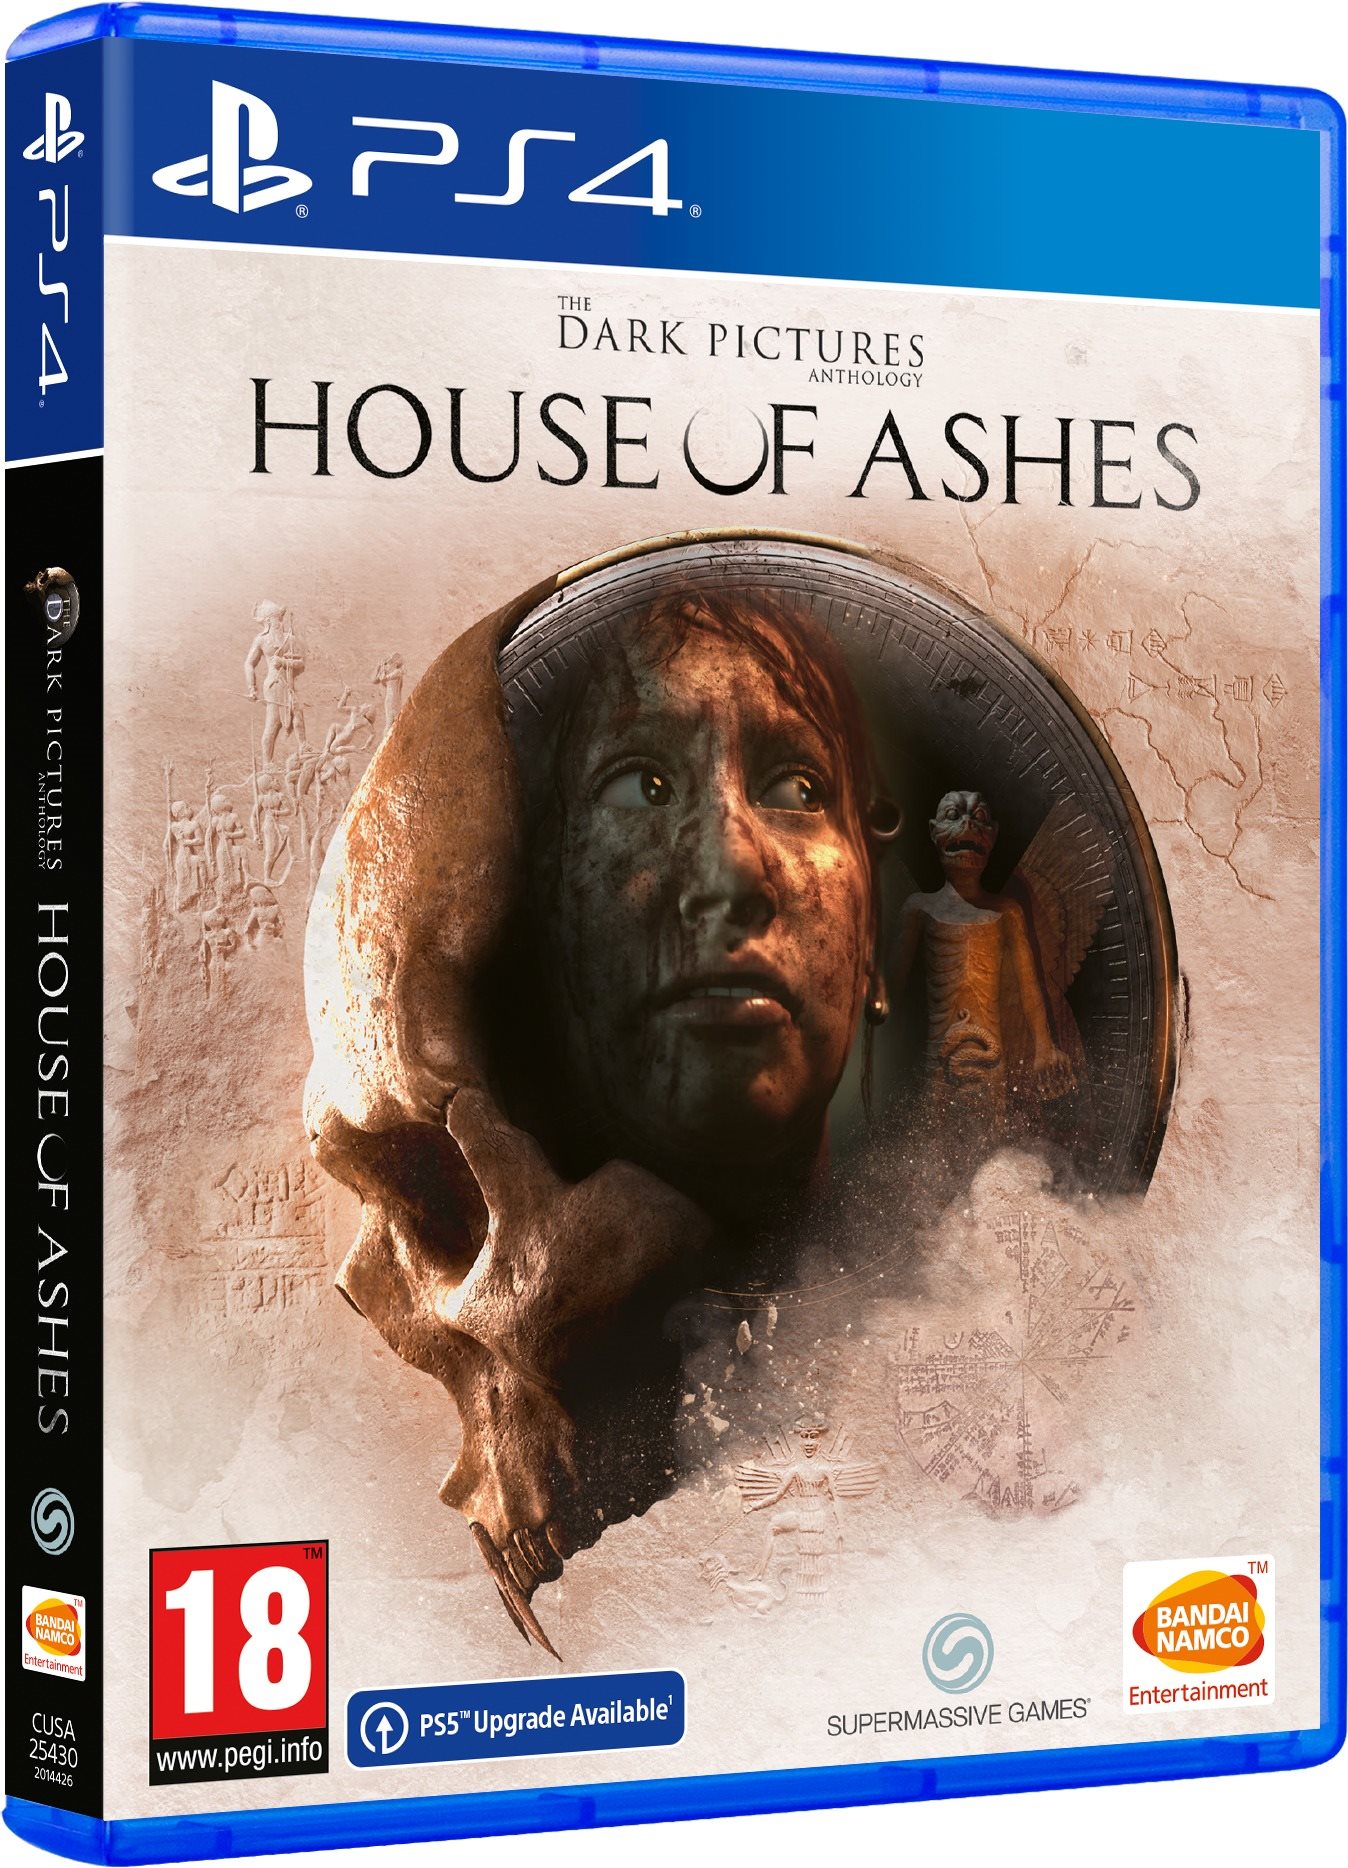 The Dark Pictures Anthology: House of Ashes - PS4, PS5